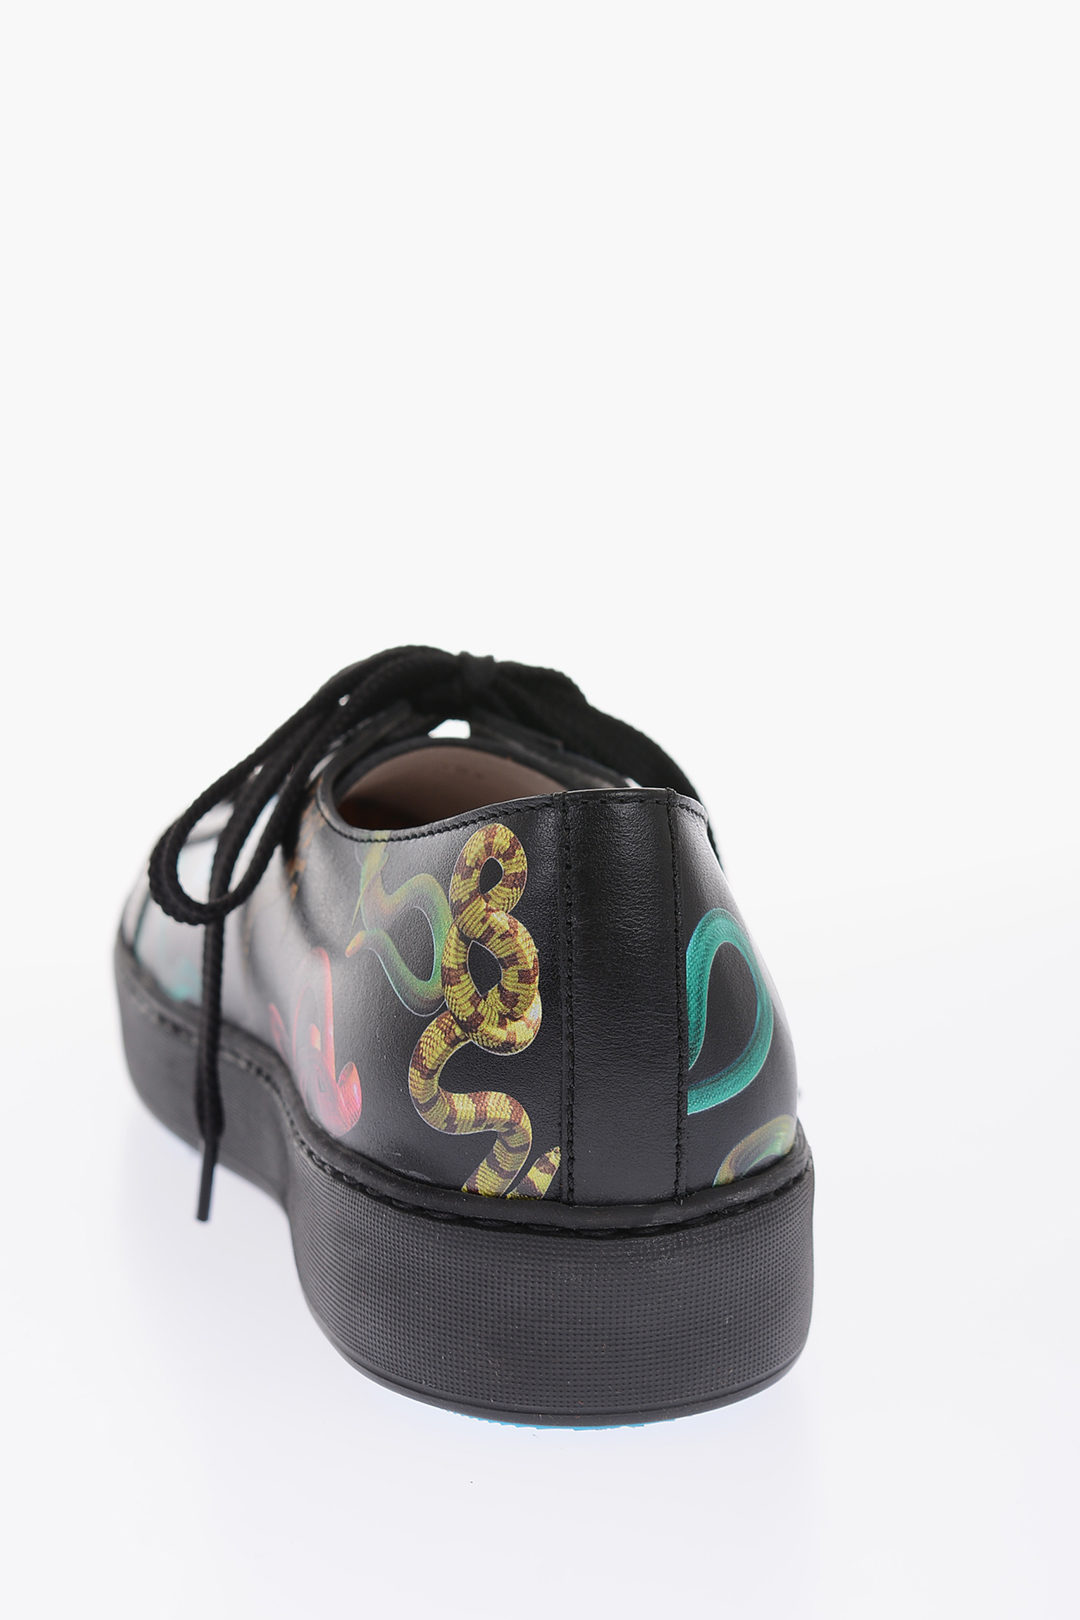 Santoni snakes printed leather sneakers women - Glamood Outlet